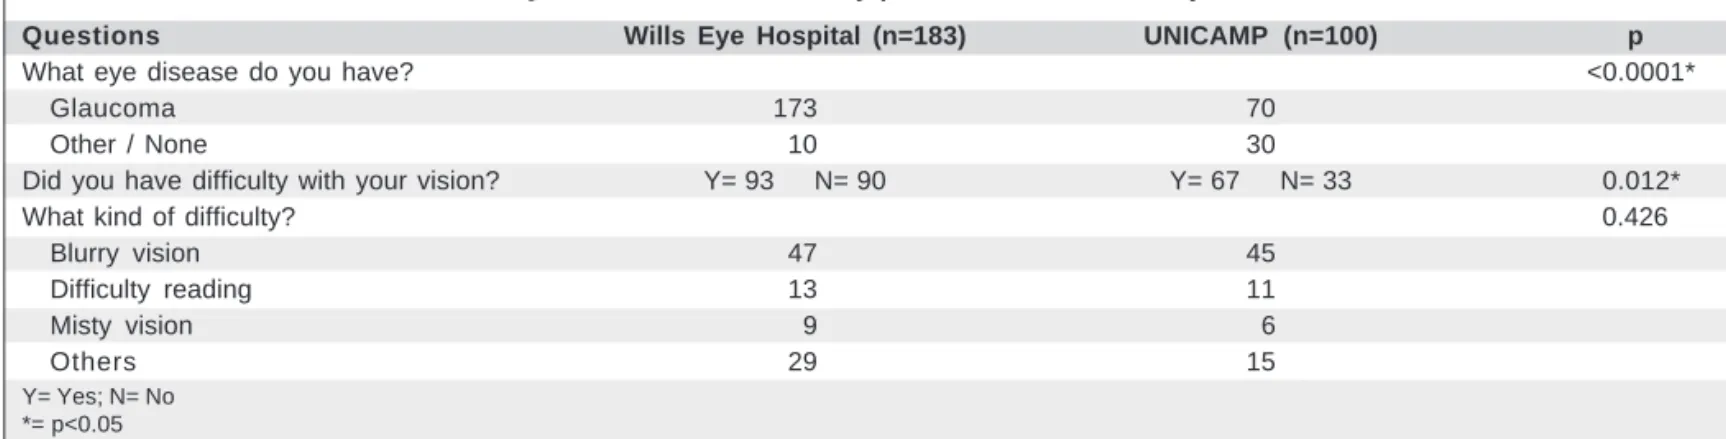 Table 2 displays the answers to questions related to the way patients felt about their eye disease